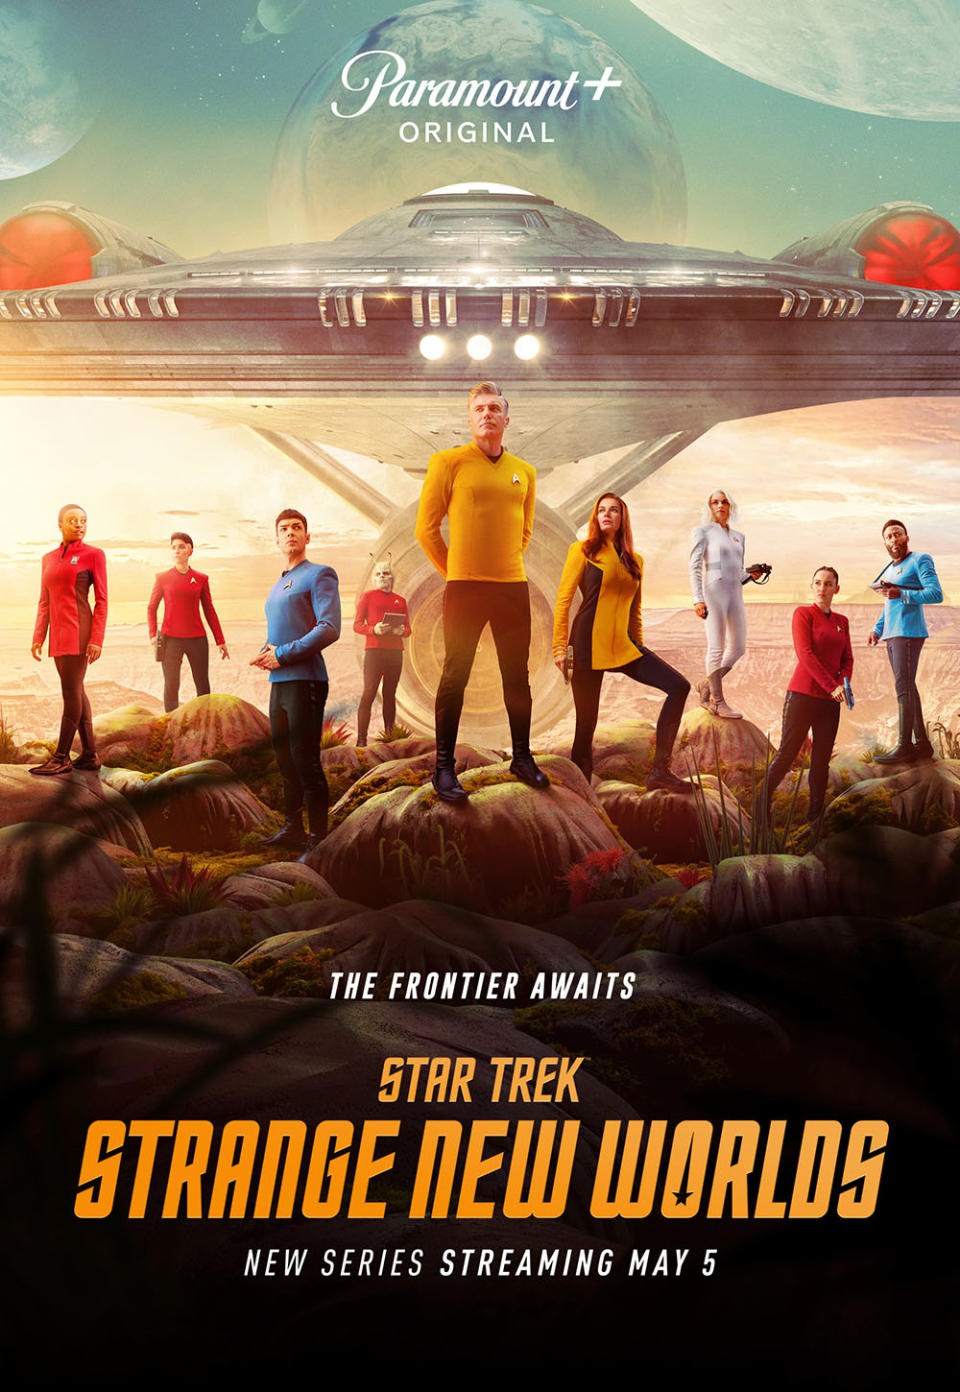 From left: Celia Rose Gooding as Uhura, Melissa Navia as Ortegas, Ethan Peck as Spock, Bruce Horak as Hemmer, Anson Mount as Pike, Rebecca Romijn as Una, Jess Bush as Chapel, Christina Chong as La’an and Baby Olusanmokun as M’Benga in the official key art of the Paramount+ original series Star Trek: Strange New Worlds. - Credit: Courtesy of James Dimmock/Paramount+